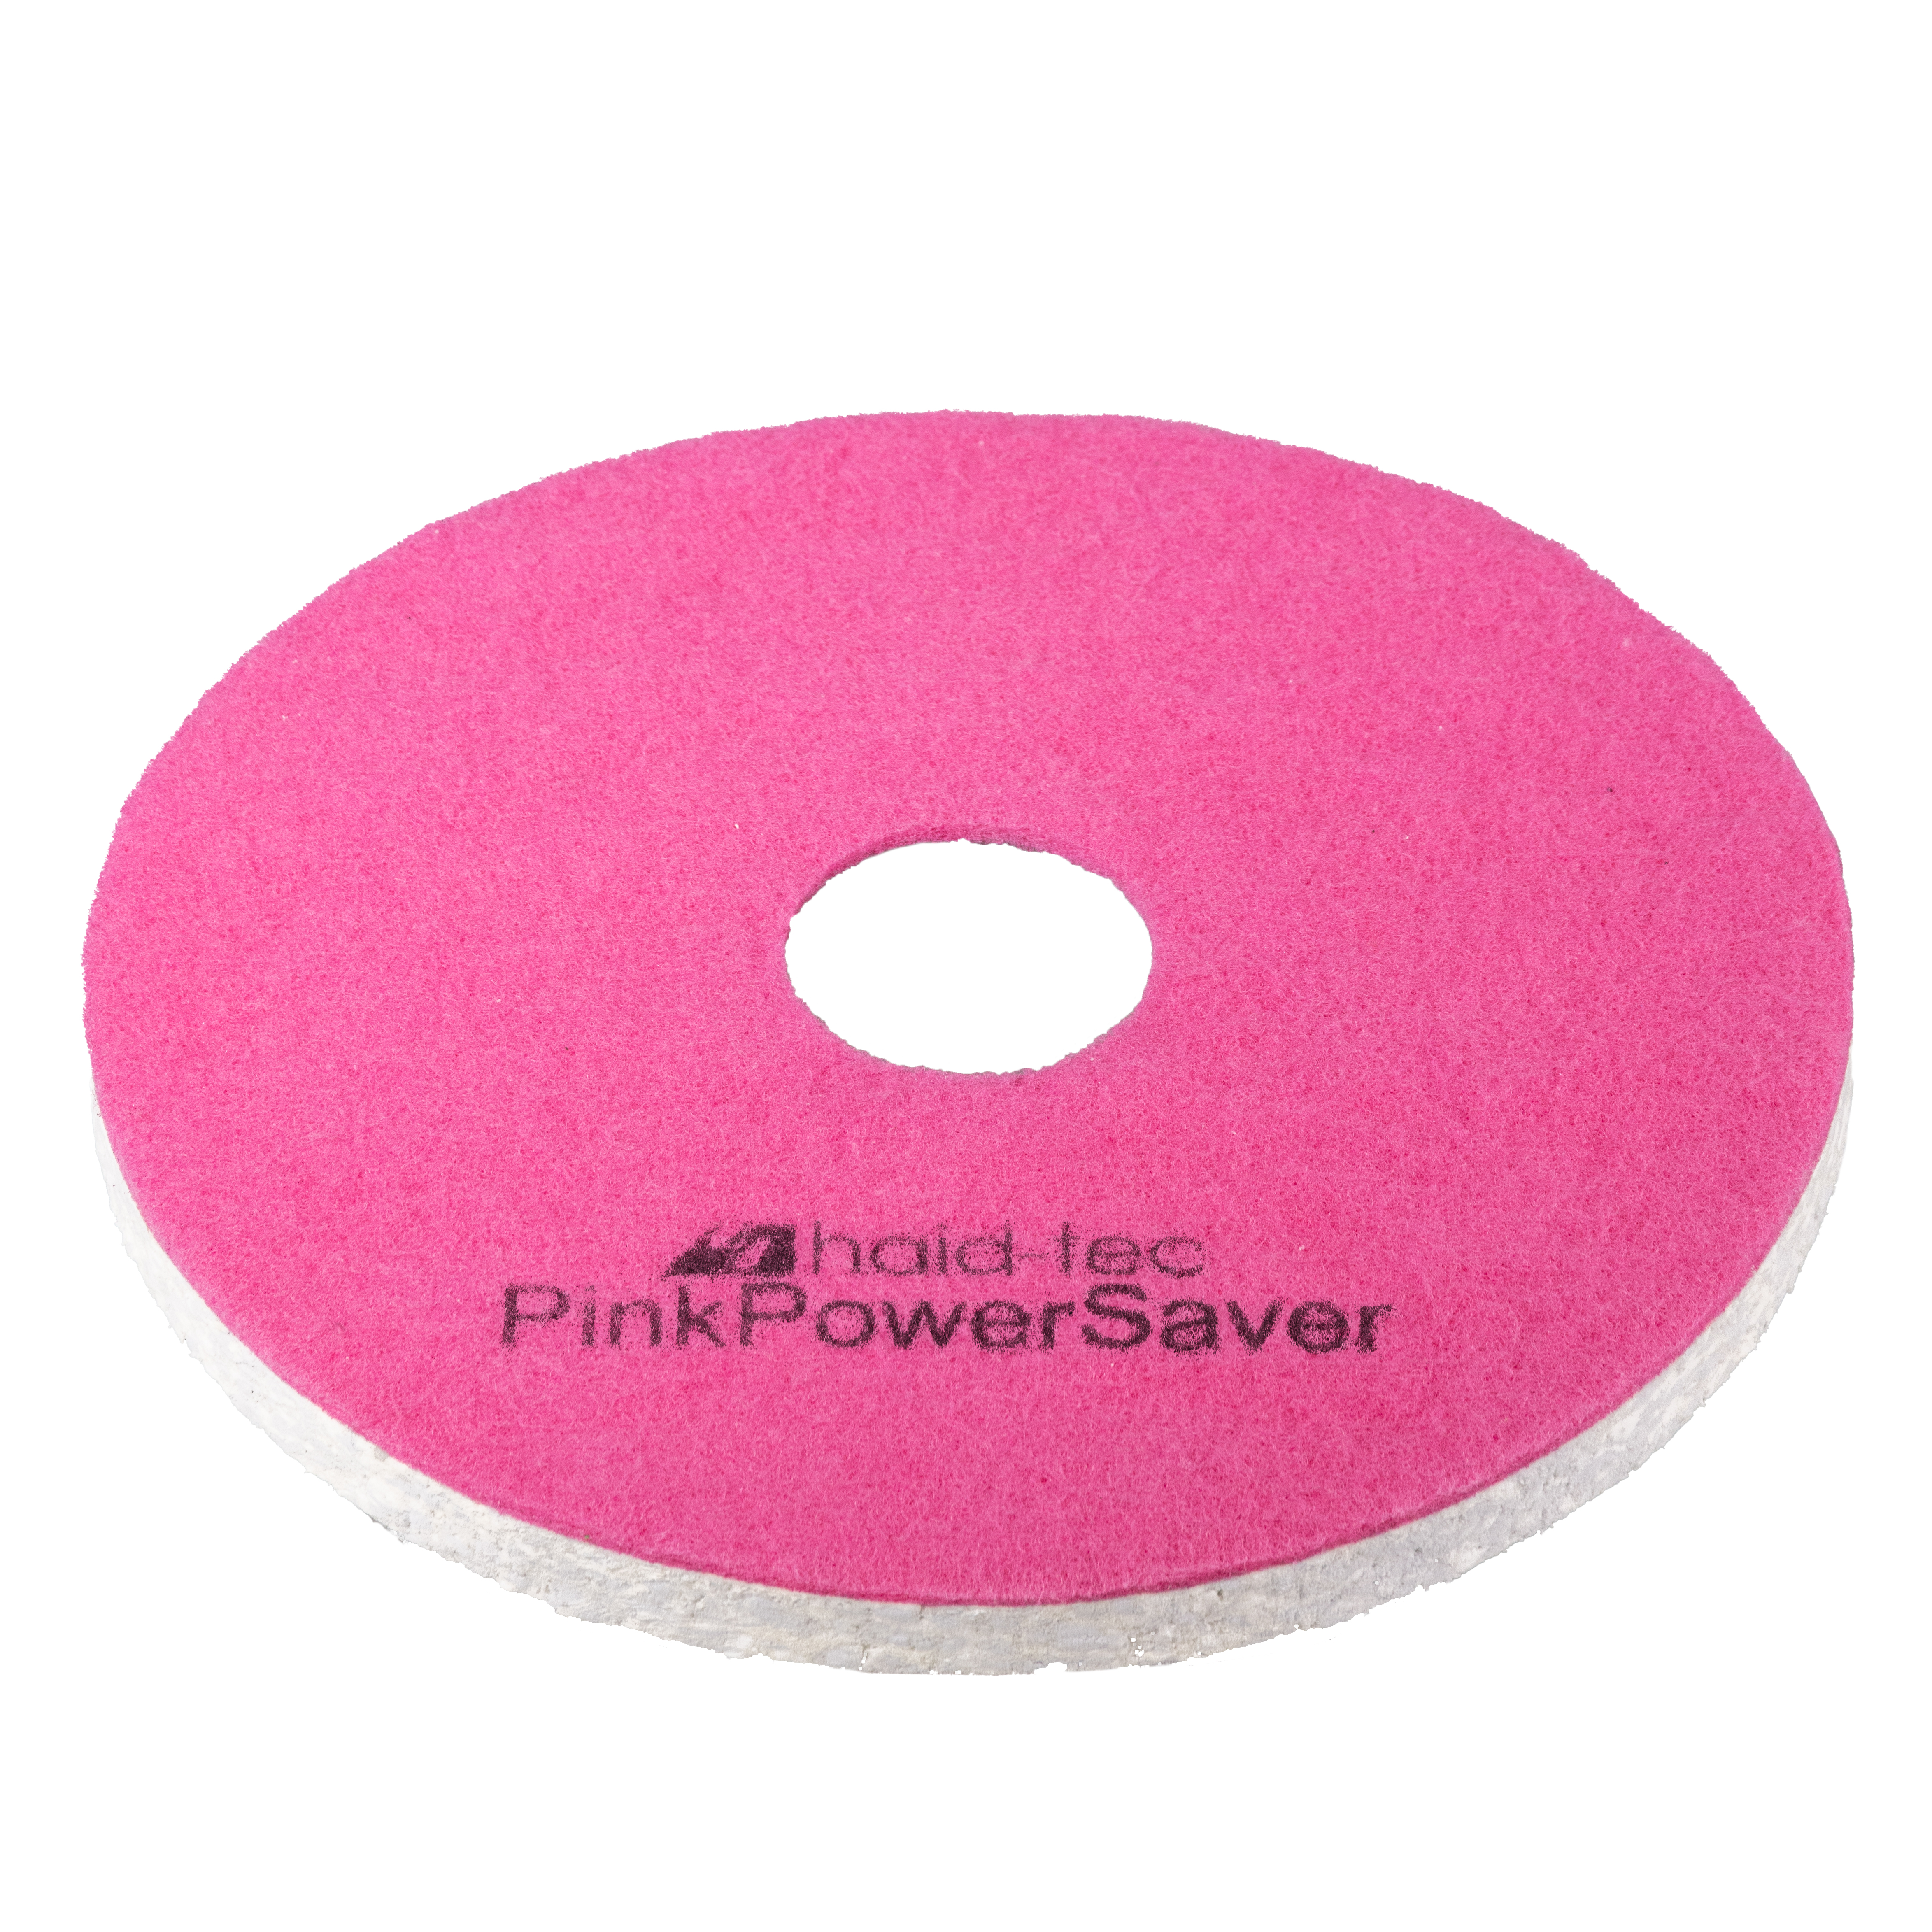 PinkPowerSaver Pad 8inch/203mm for i-mop XL, pad for compact scrubber dryer - melamine pad for intensive and maintenance cleaning